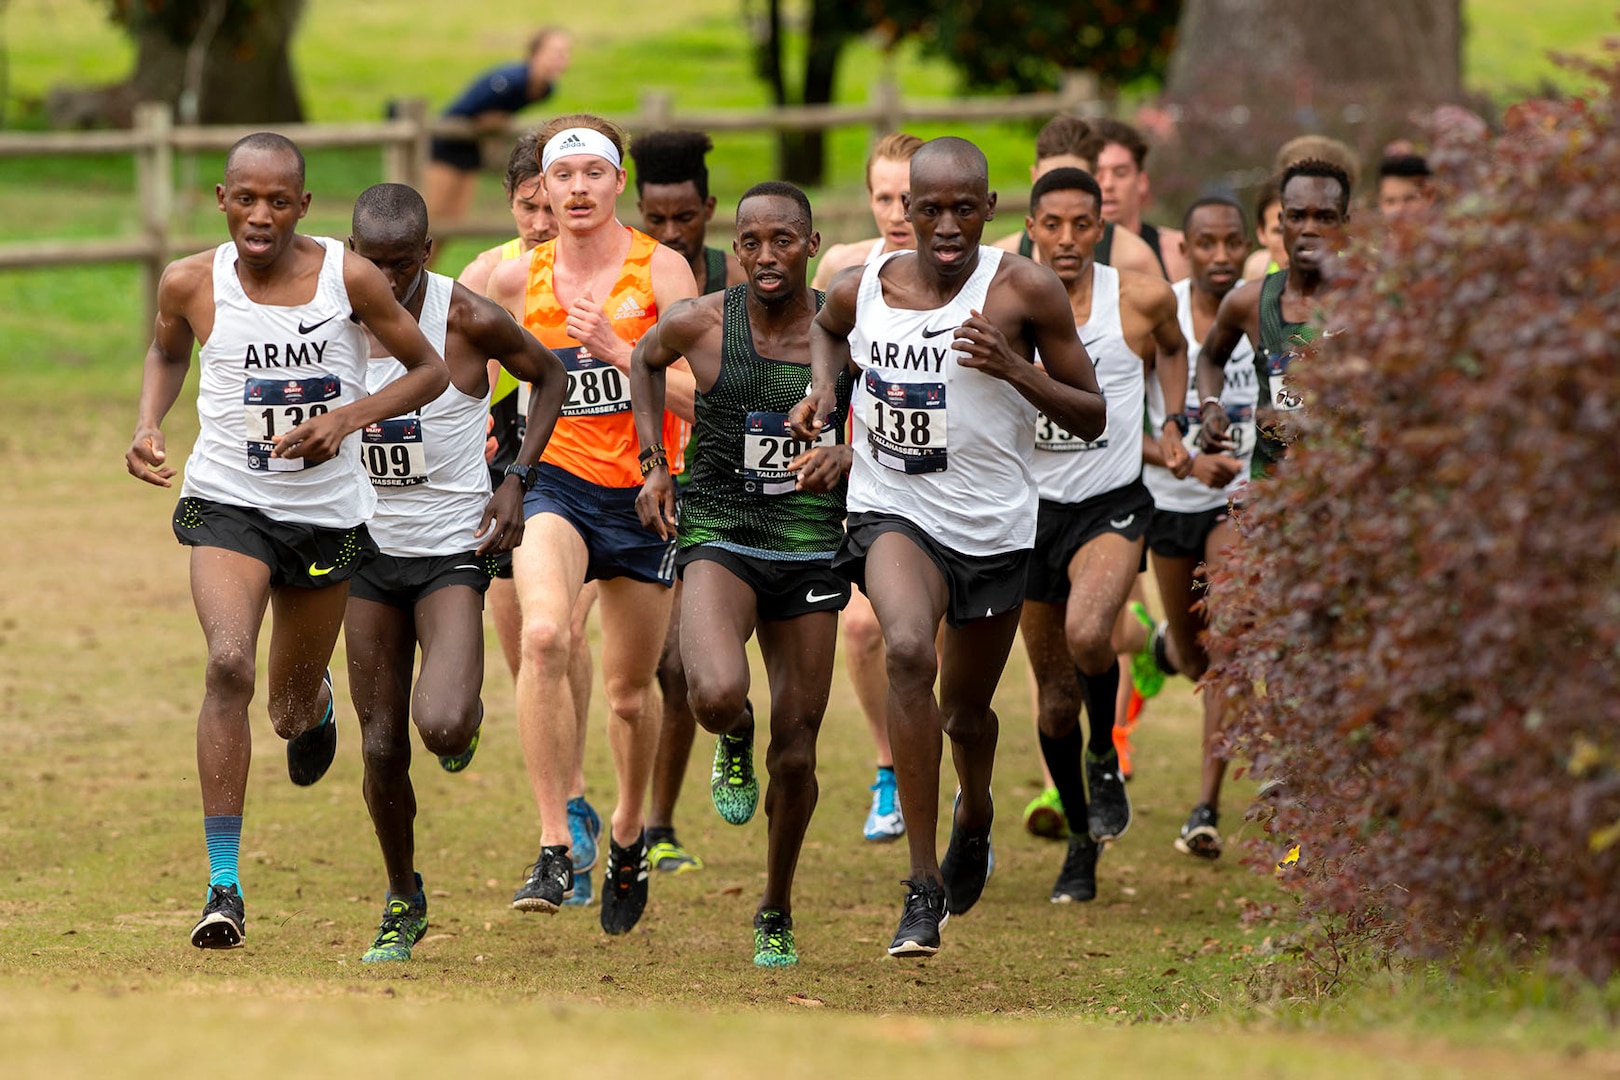 Army runners compete with their peers as the top cross country runners in the nation during the 2019 Armed Forces Cross Country Championship which ran concurrently with the 2019 USA Track and Field Cross Country Championship .